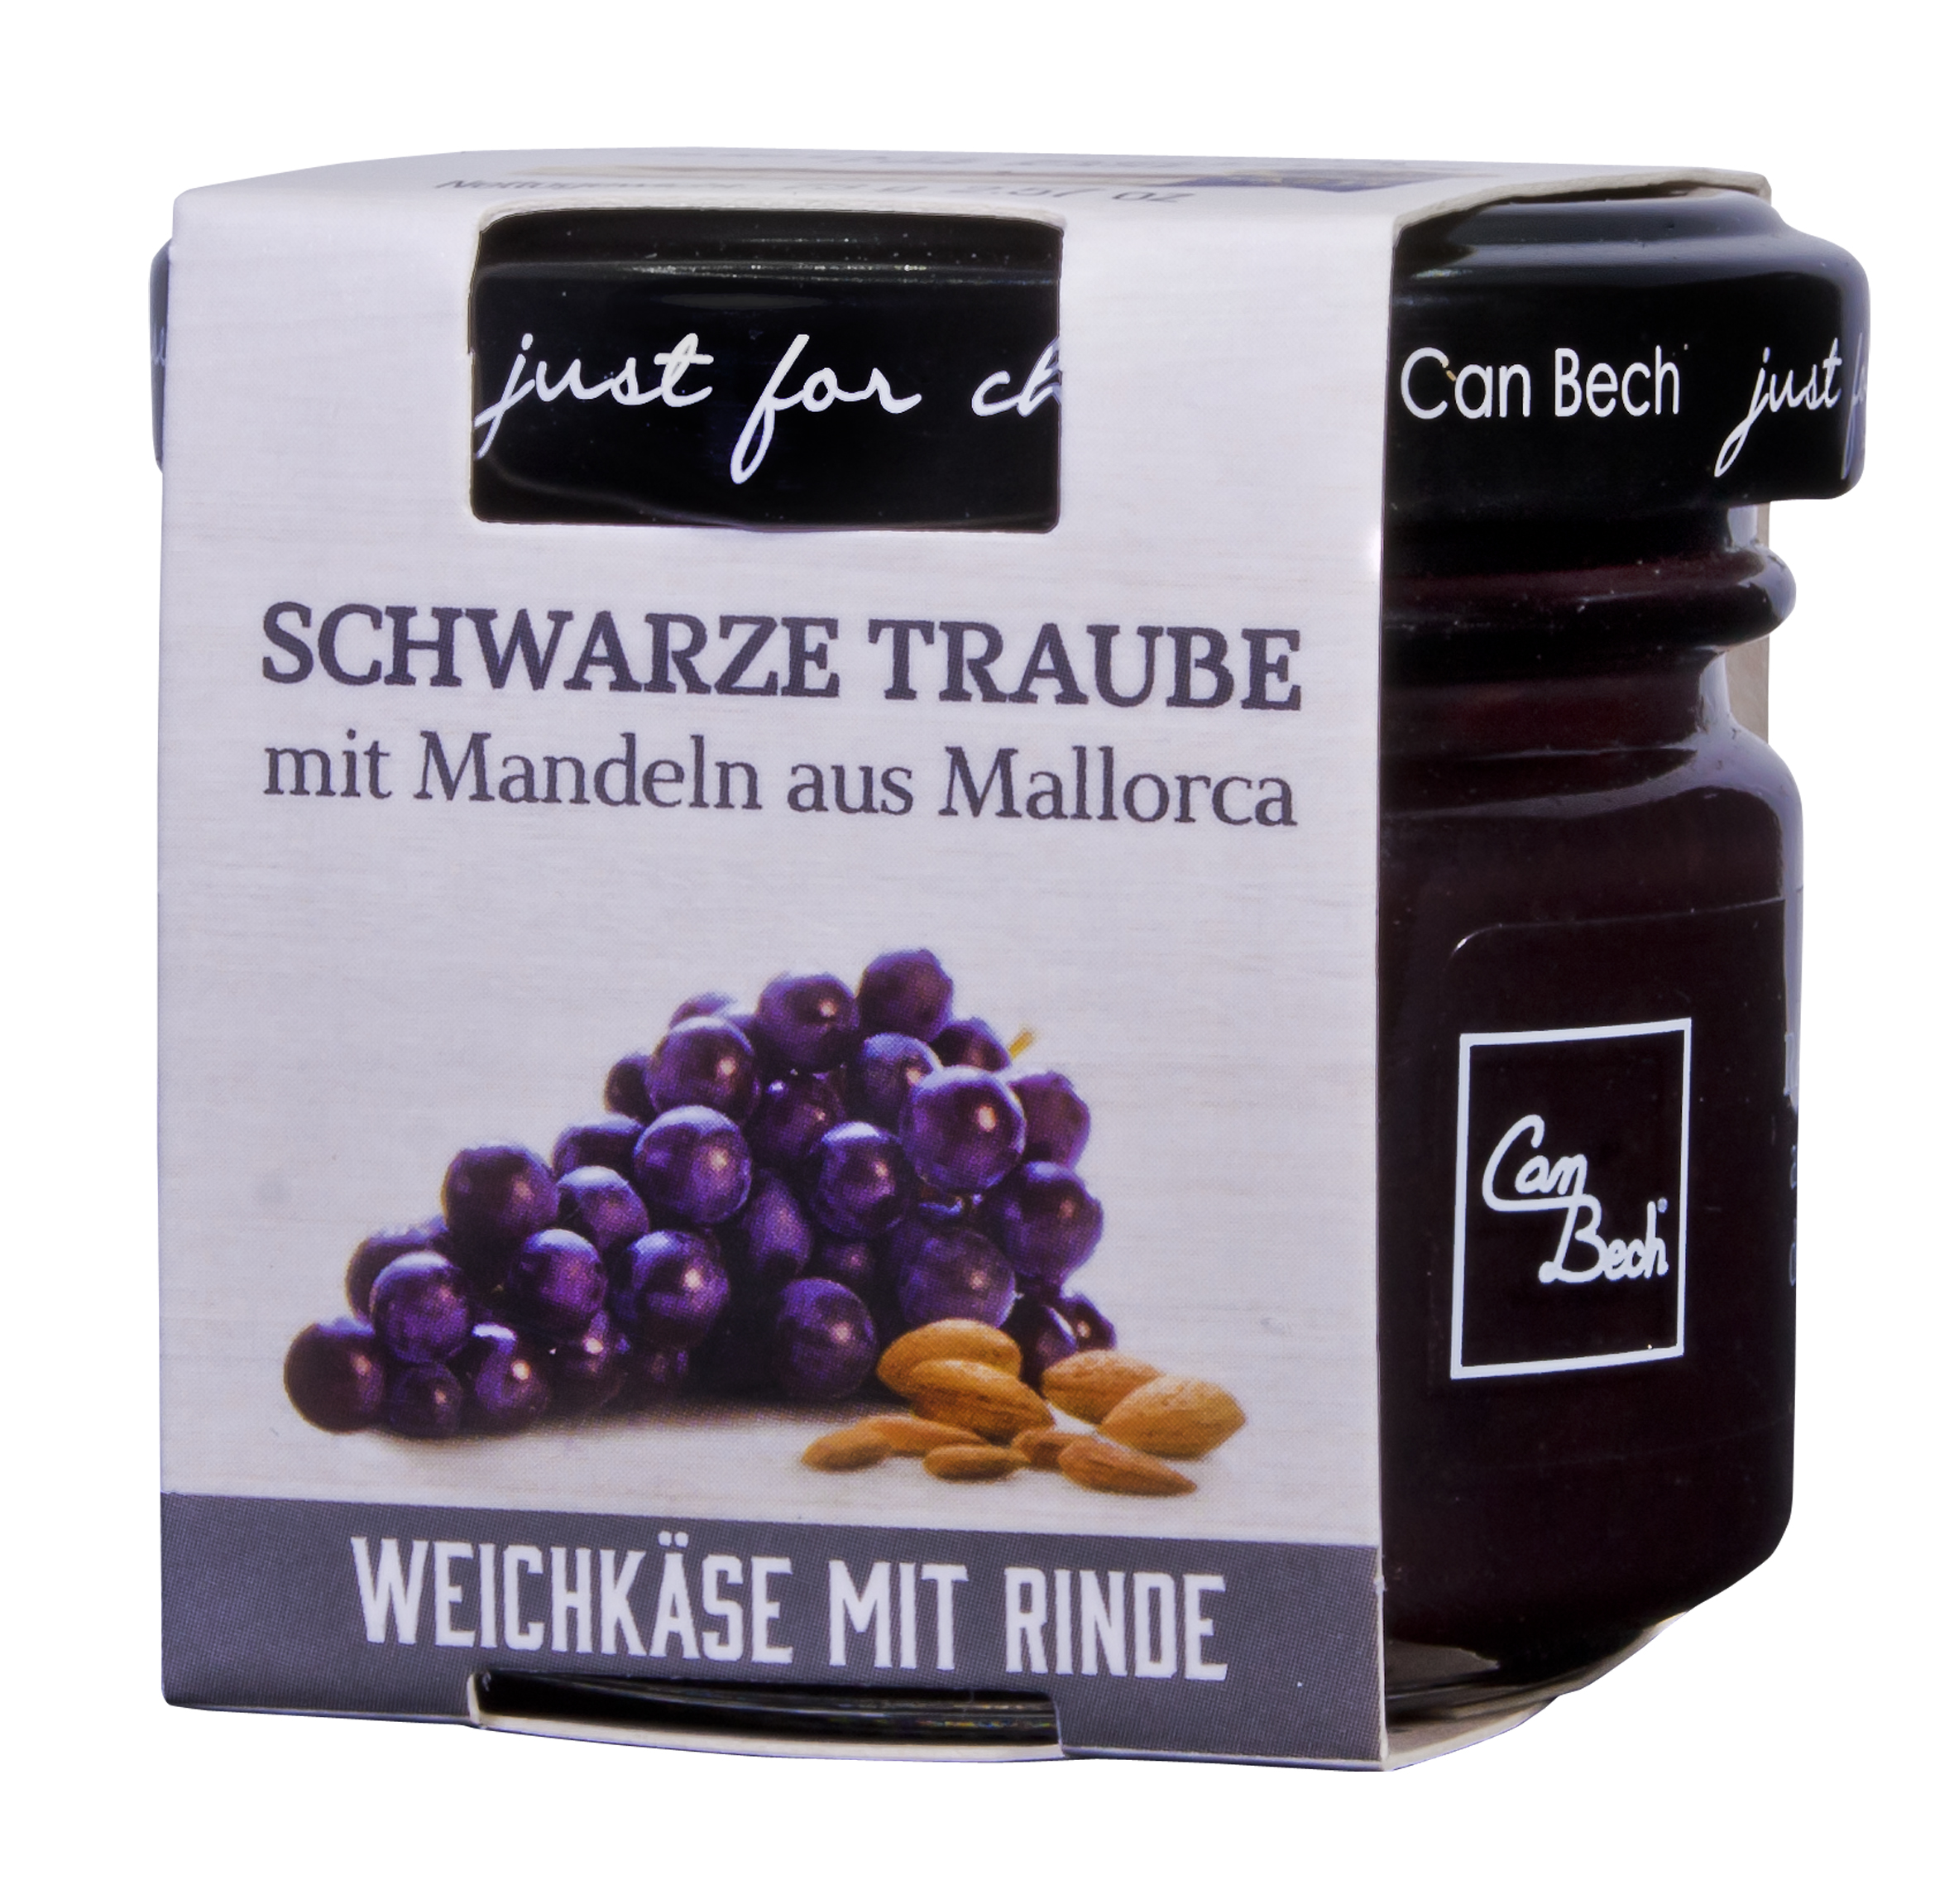  Just for Cheese schwarze Traube